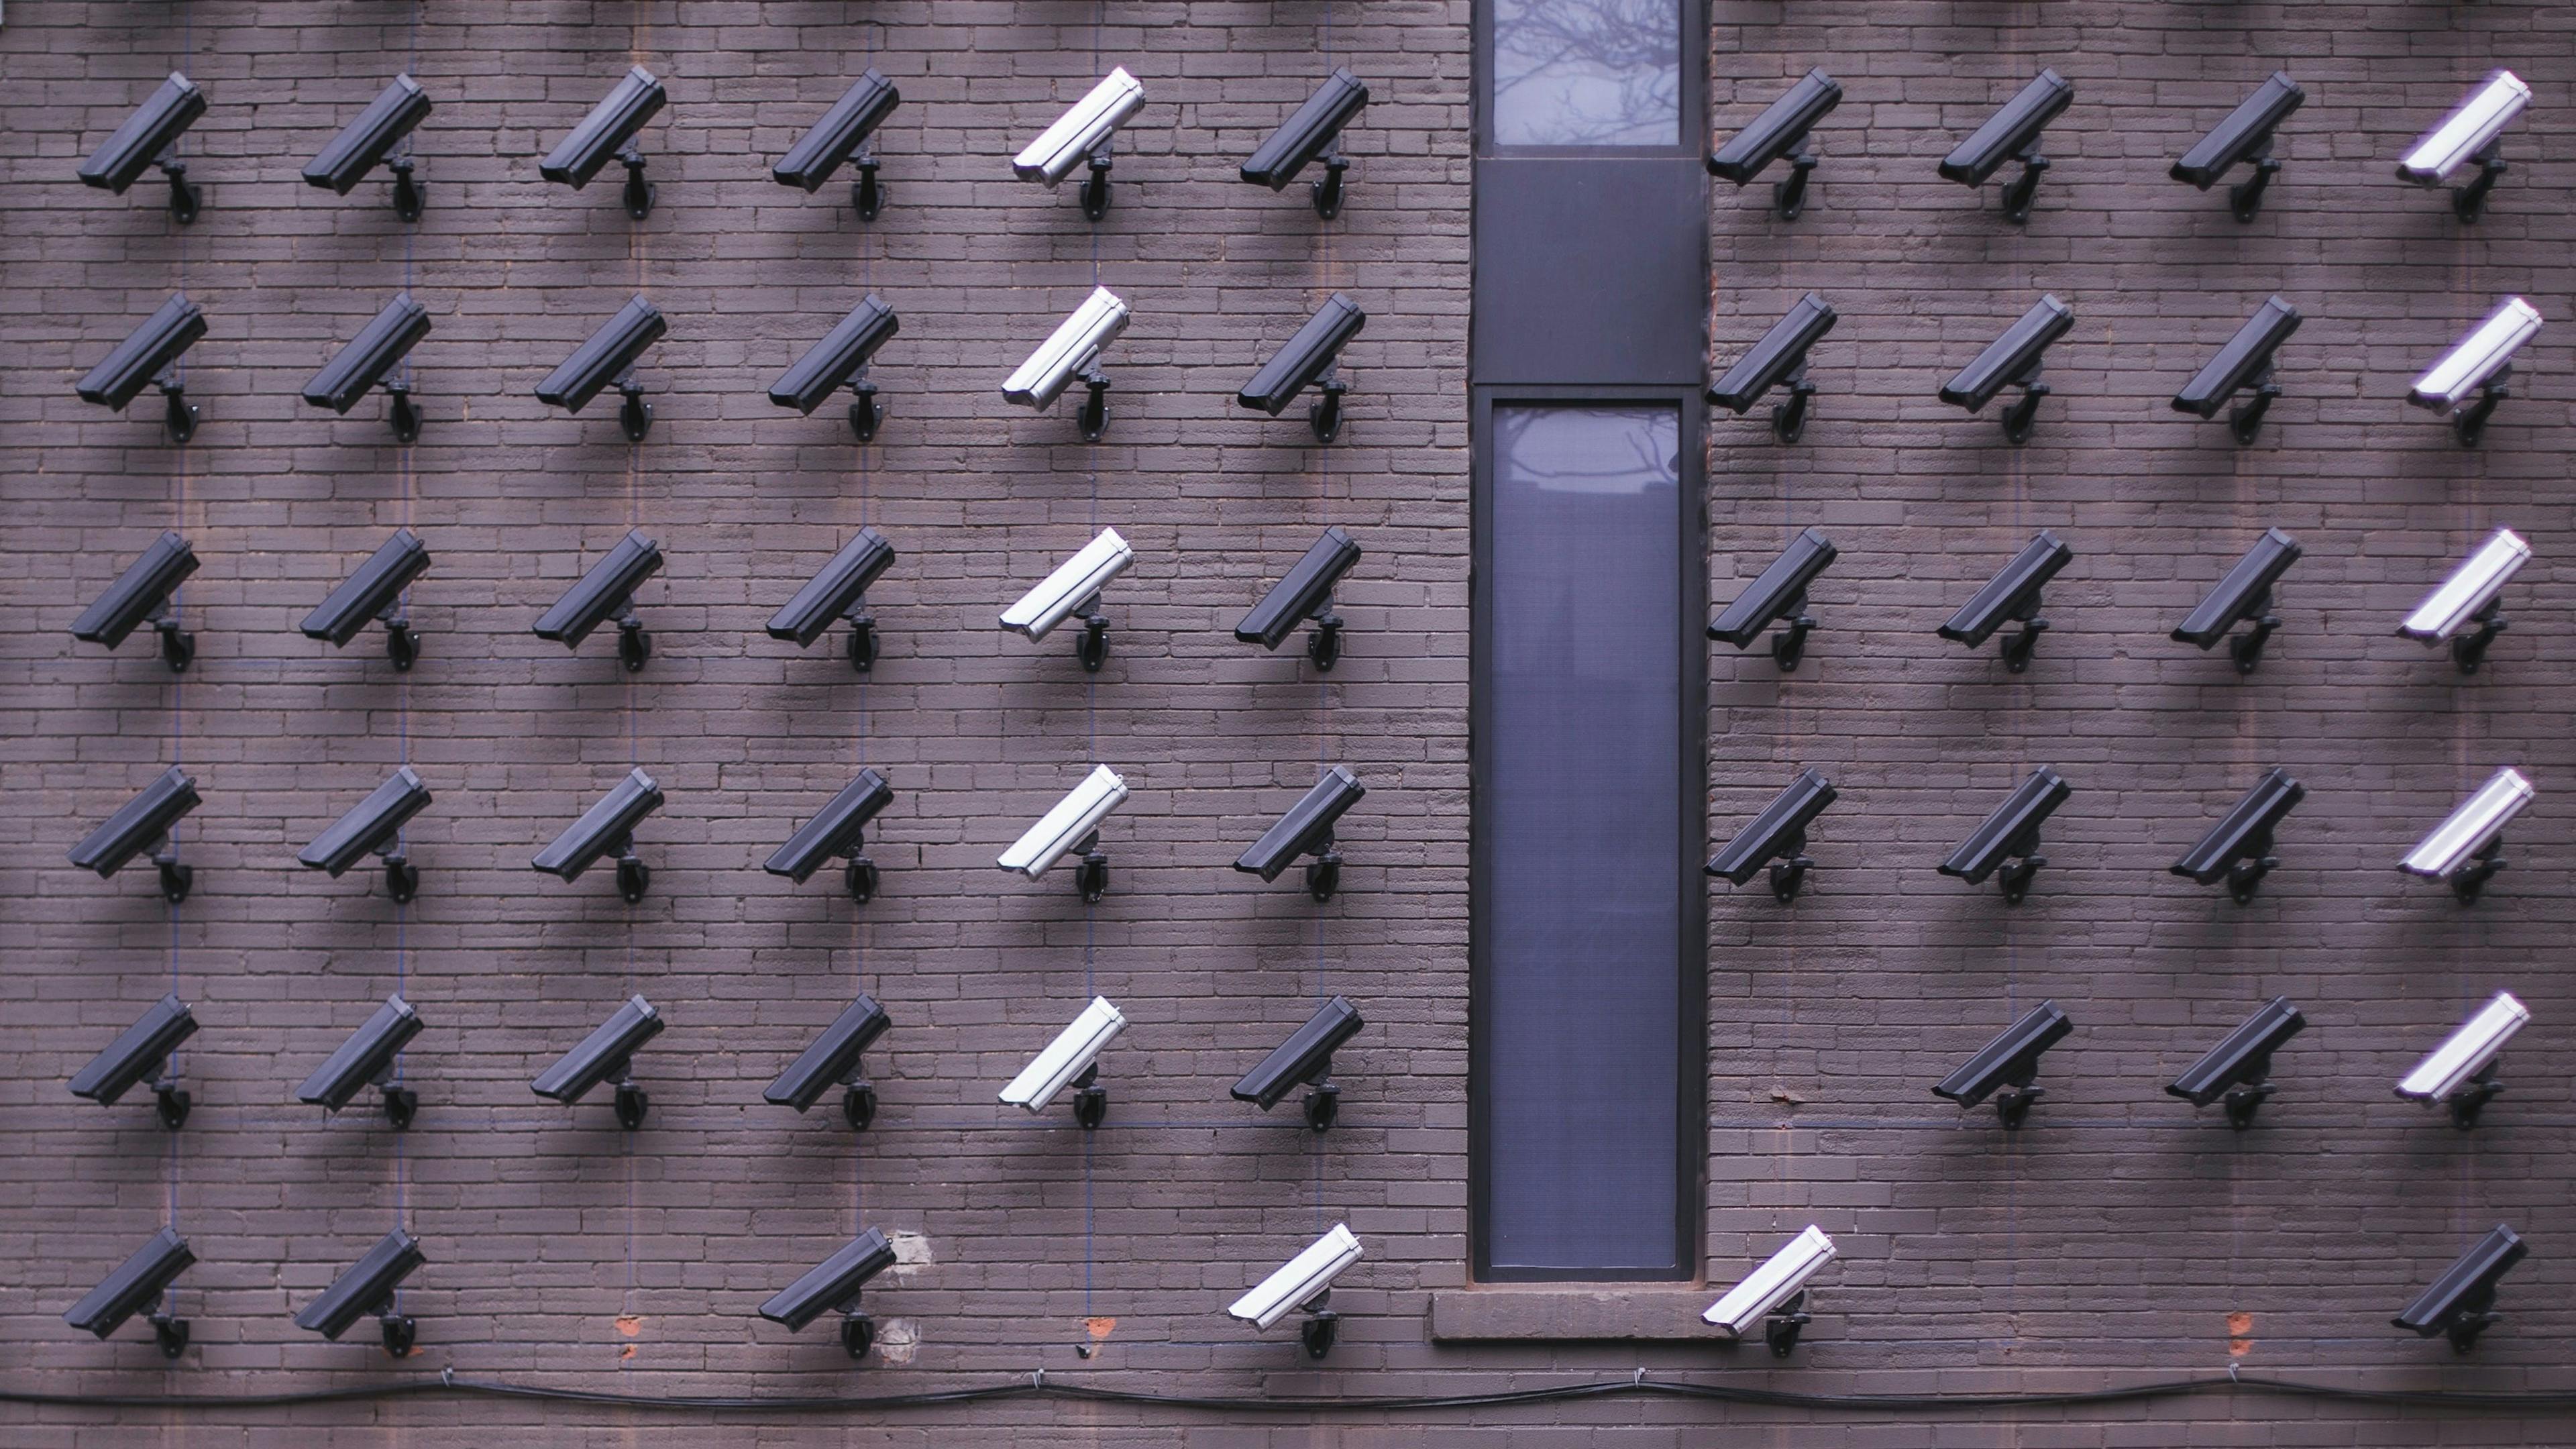 Cameras on a wall